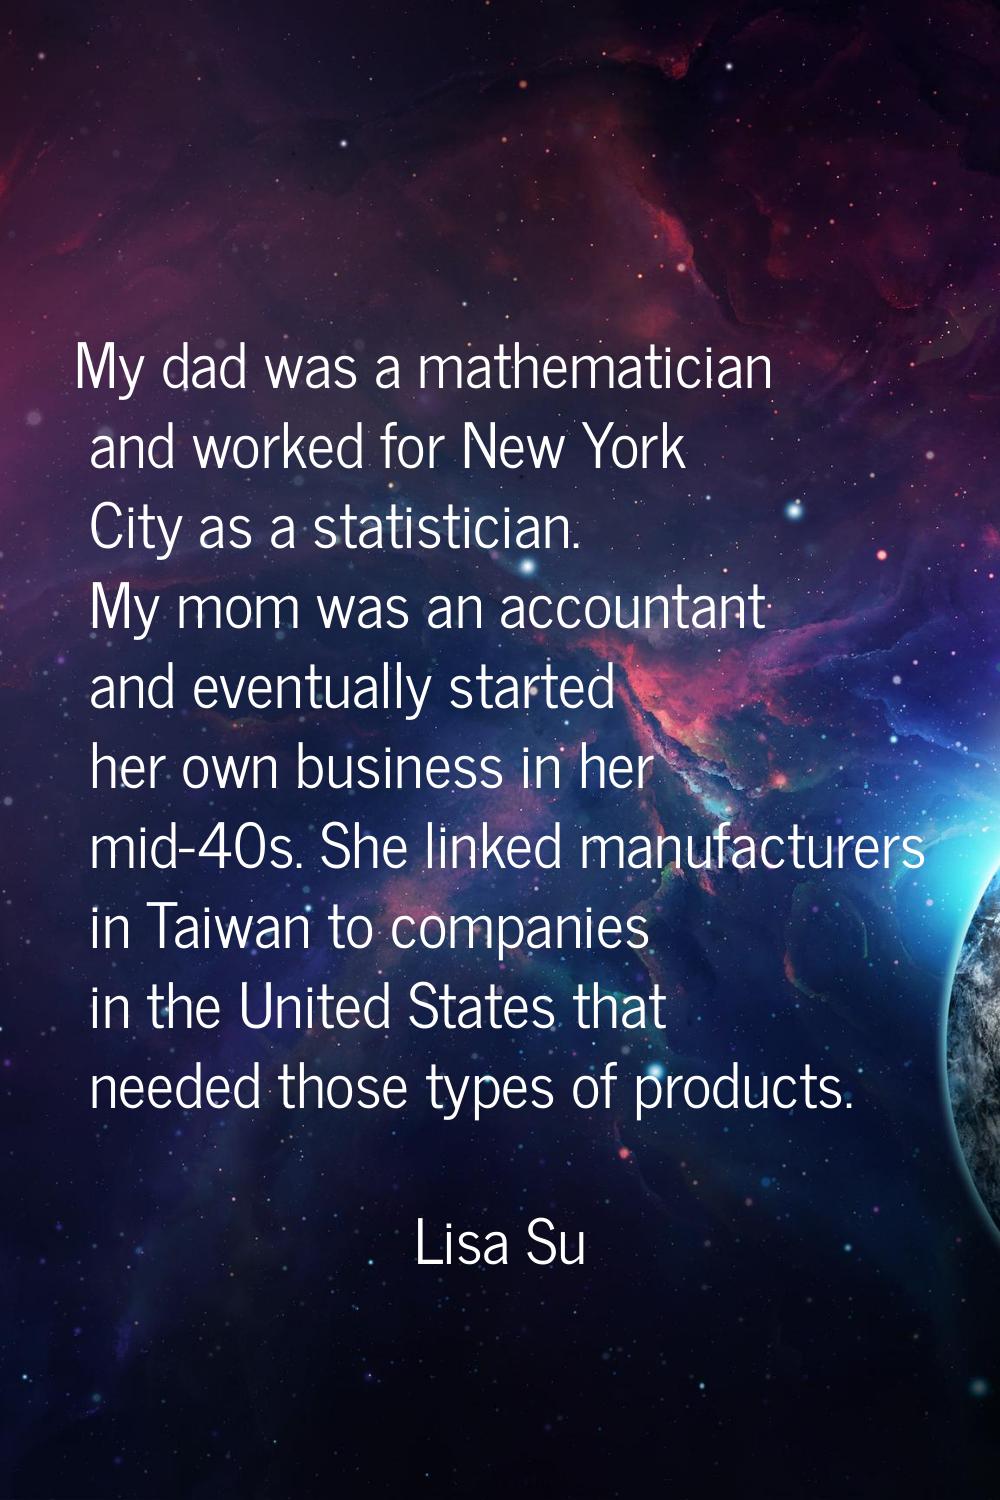 My dad was a mathematician and worked for New York City as a statistician. My mom was an accountant